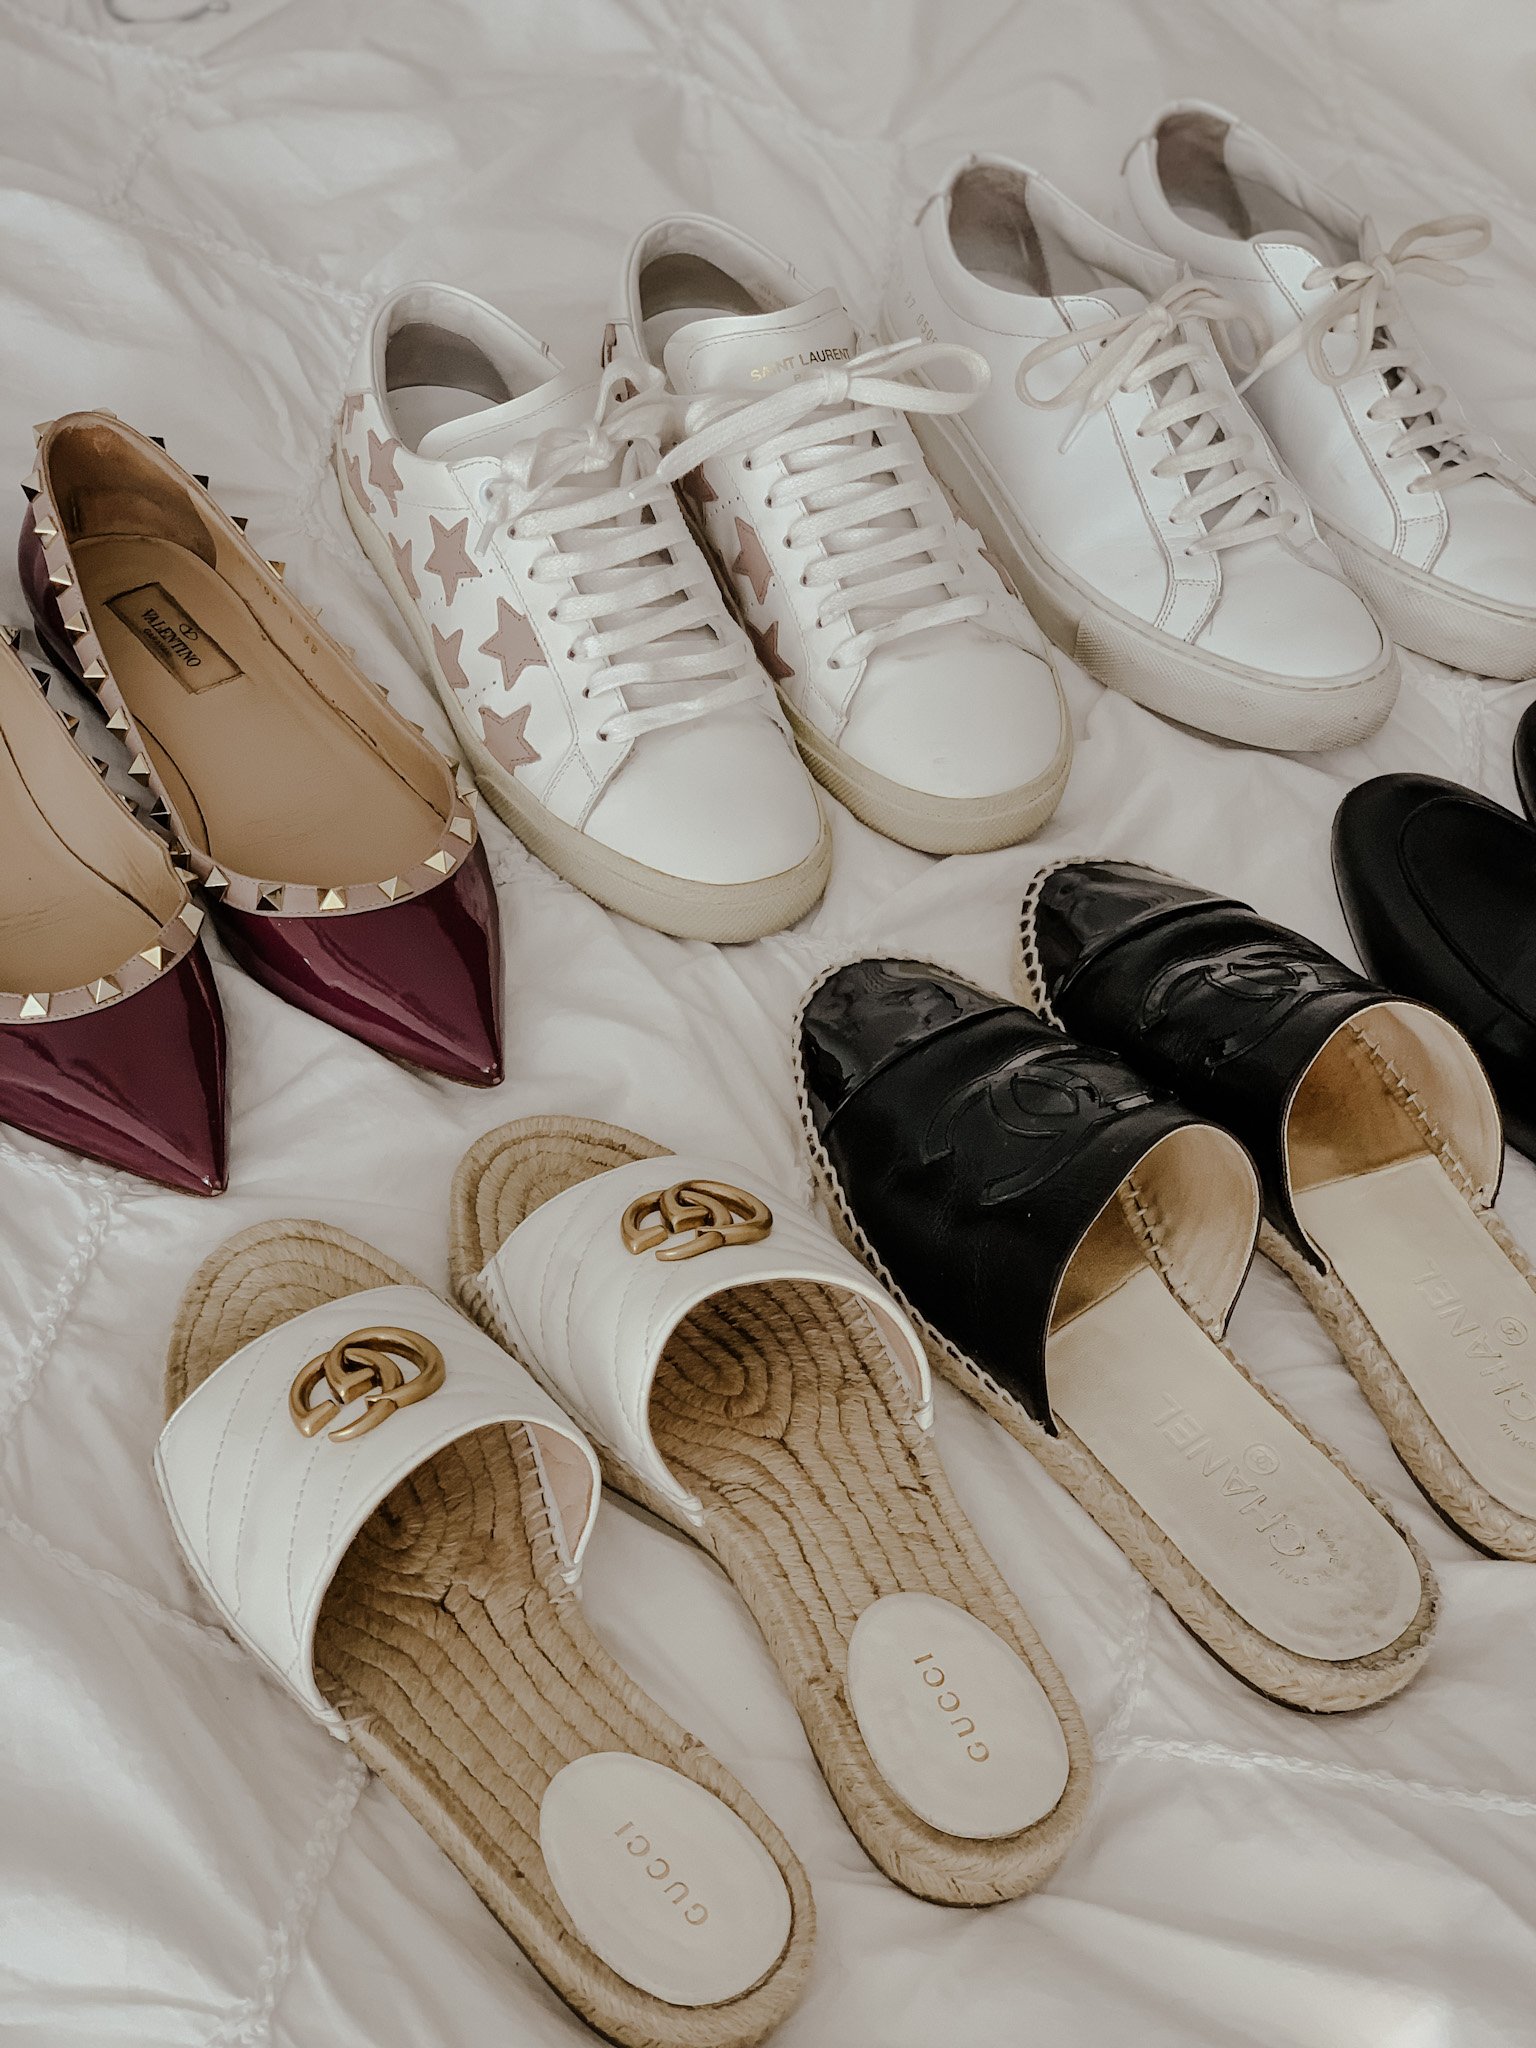 When To Spend Money On Designer Shoes | Jessica Ashley